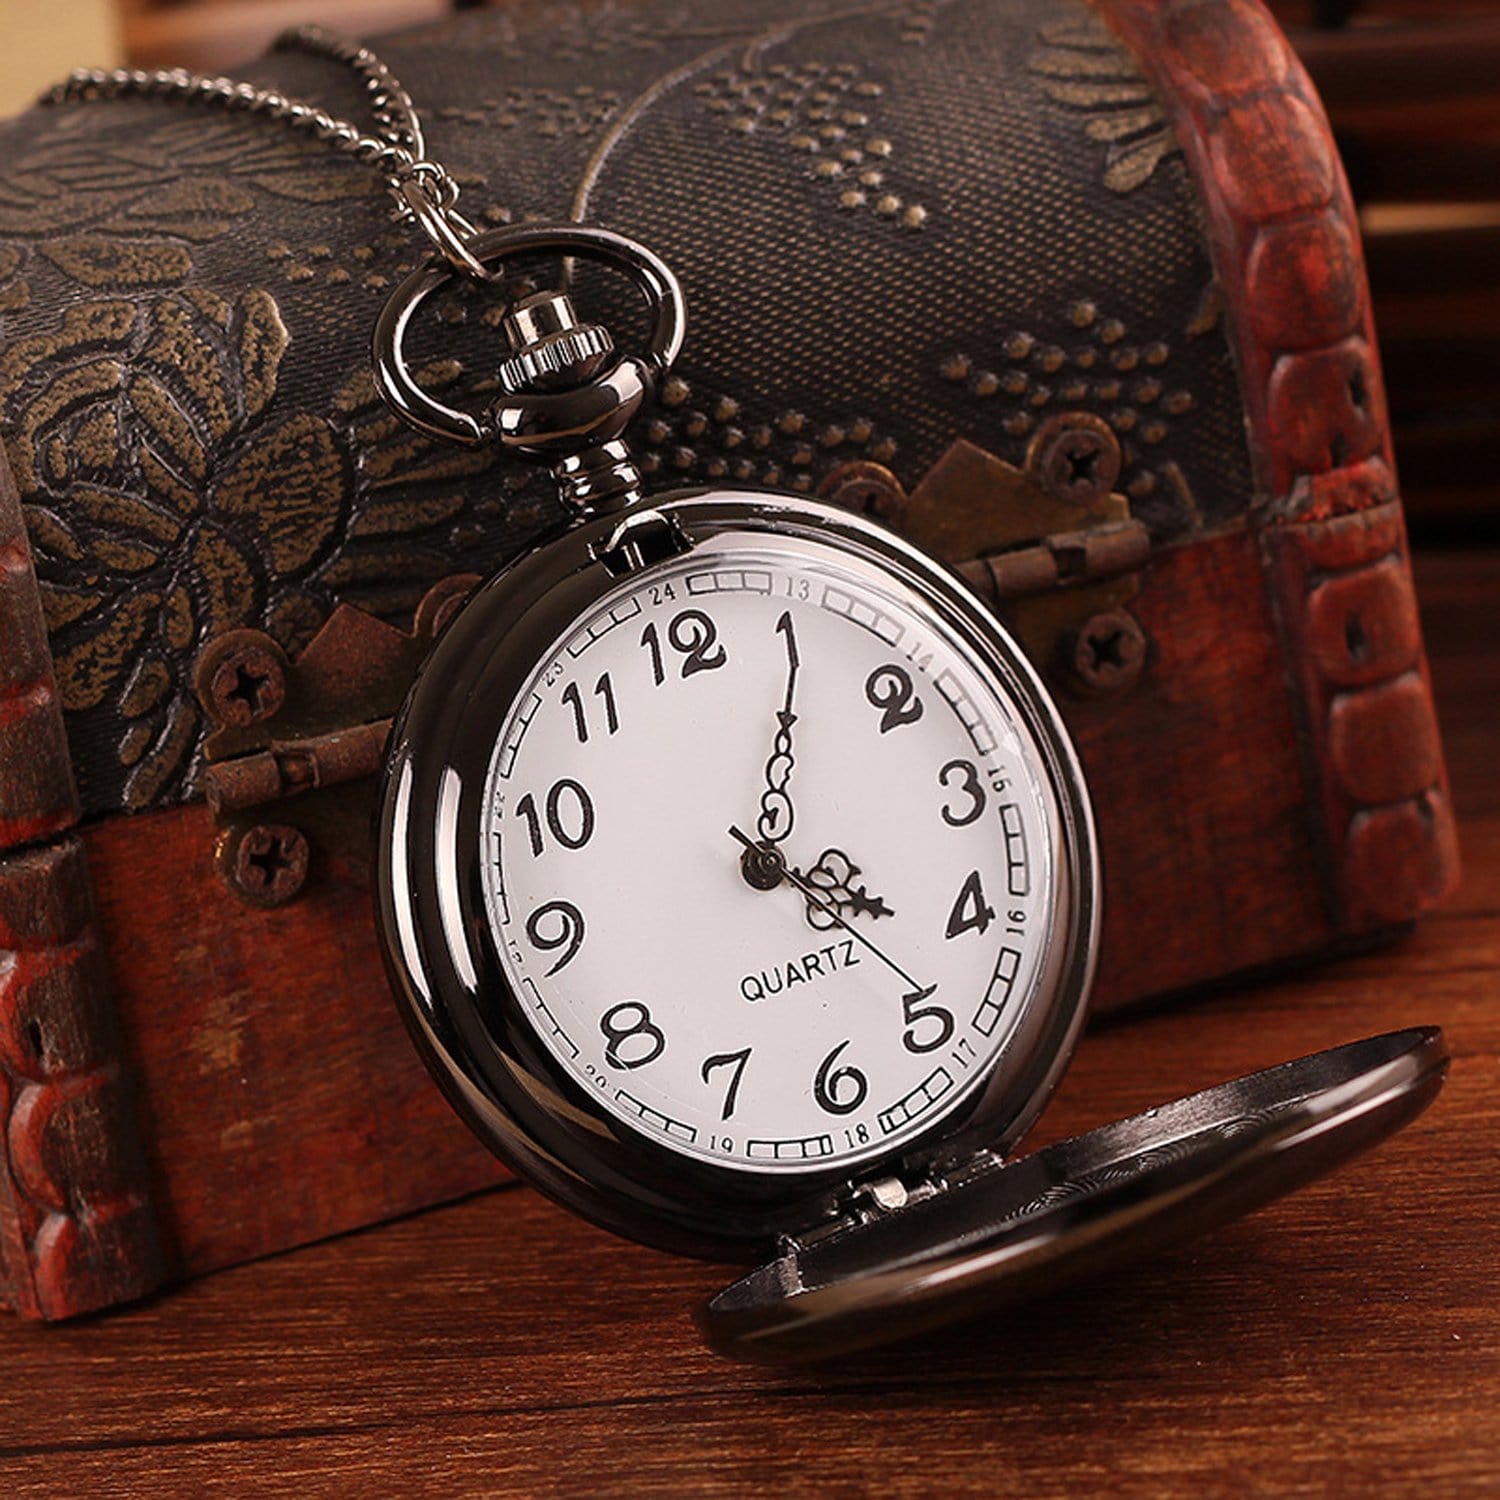 Pocket Watches To My Boyfriend - When I Tell You I Love You Pocket Watch GiveMe-Gifts